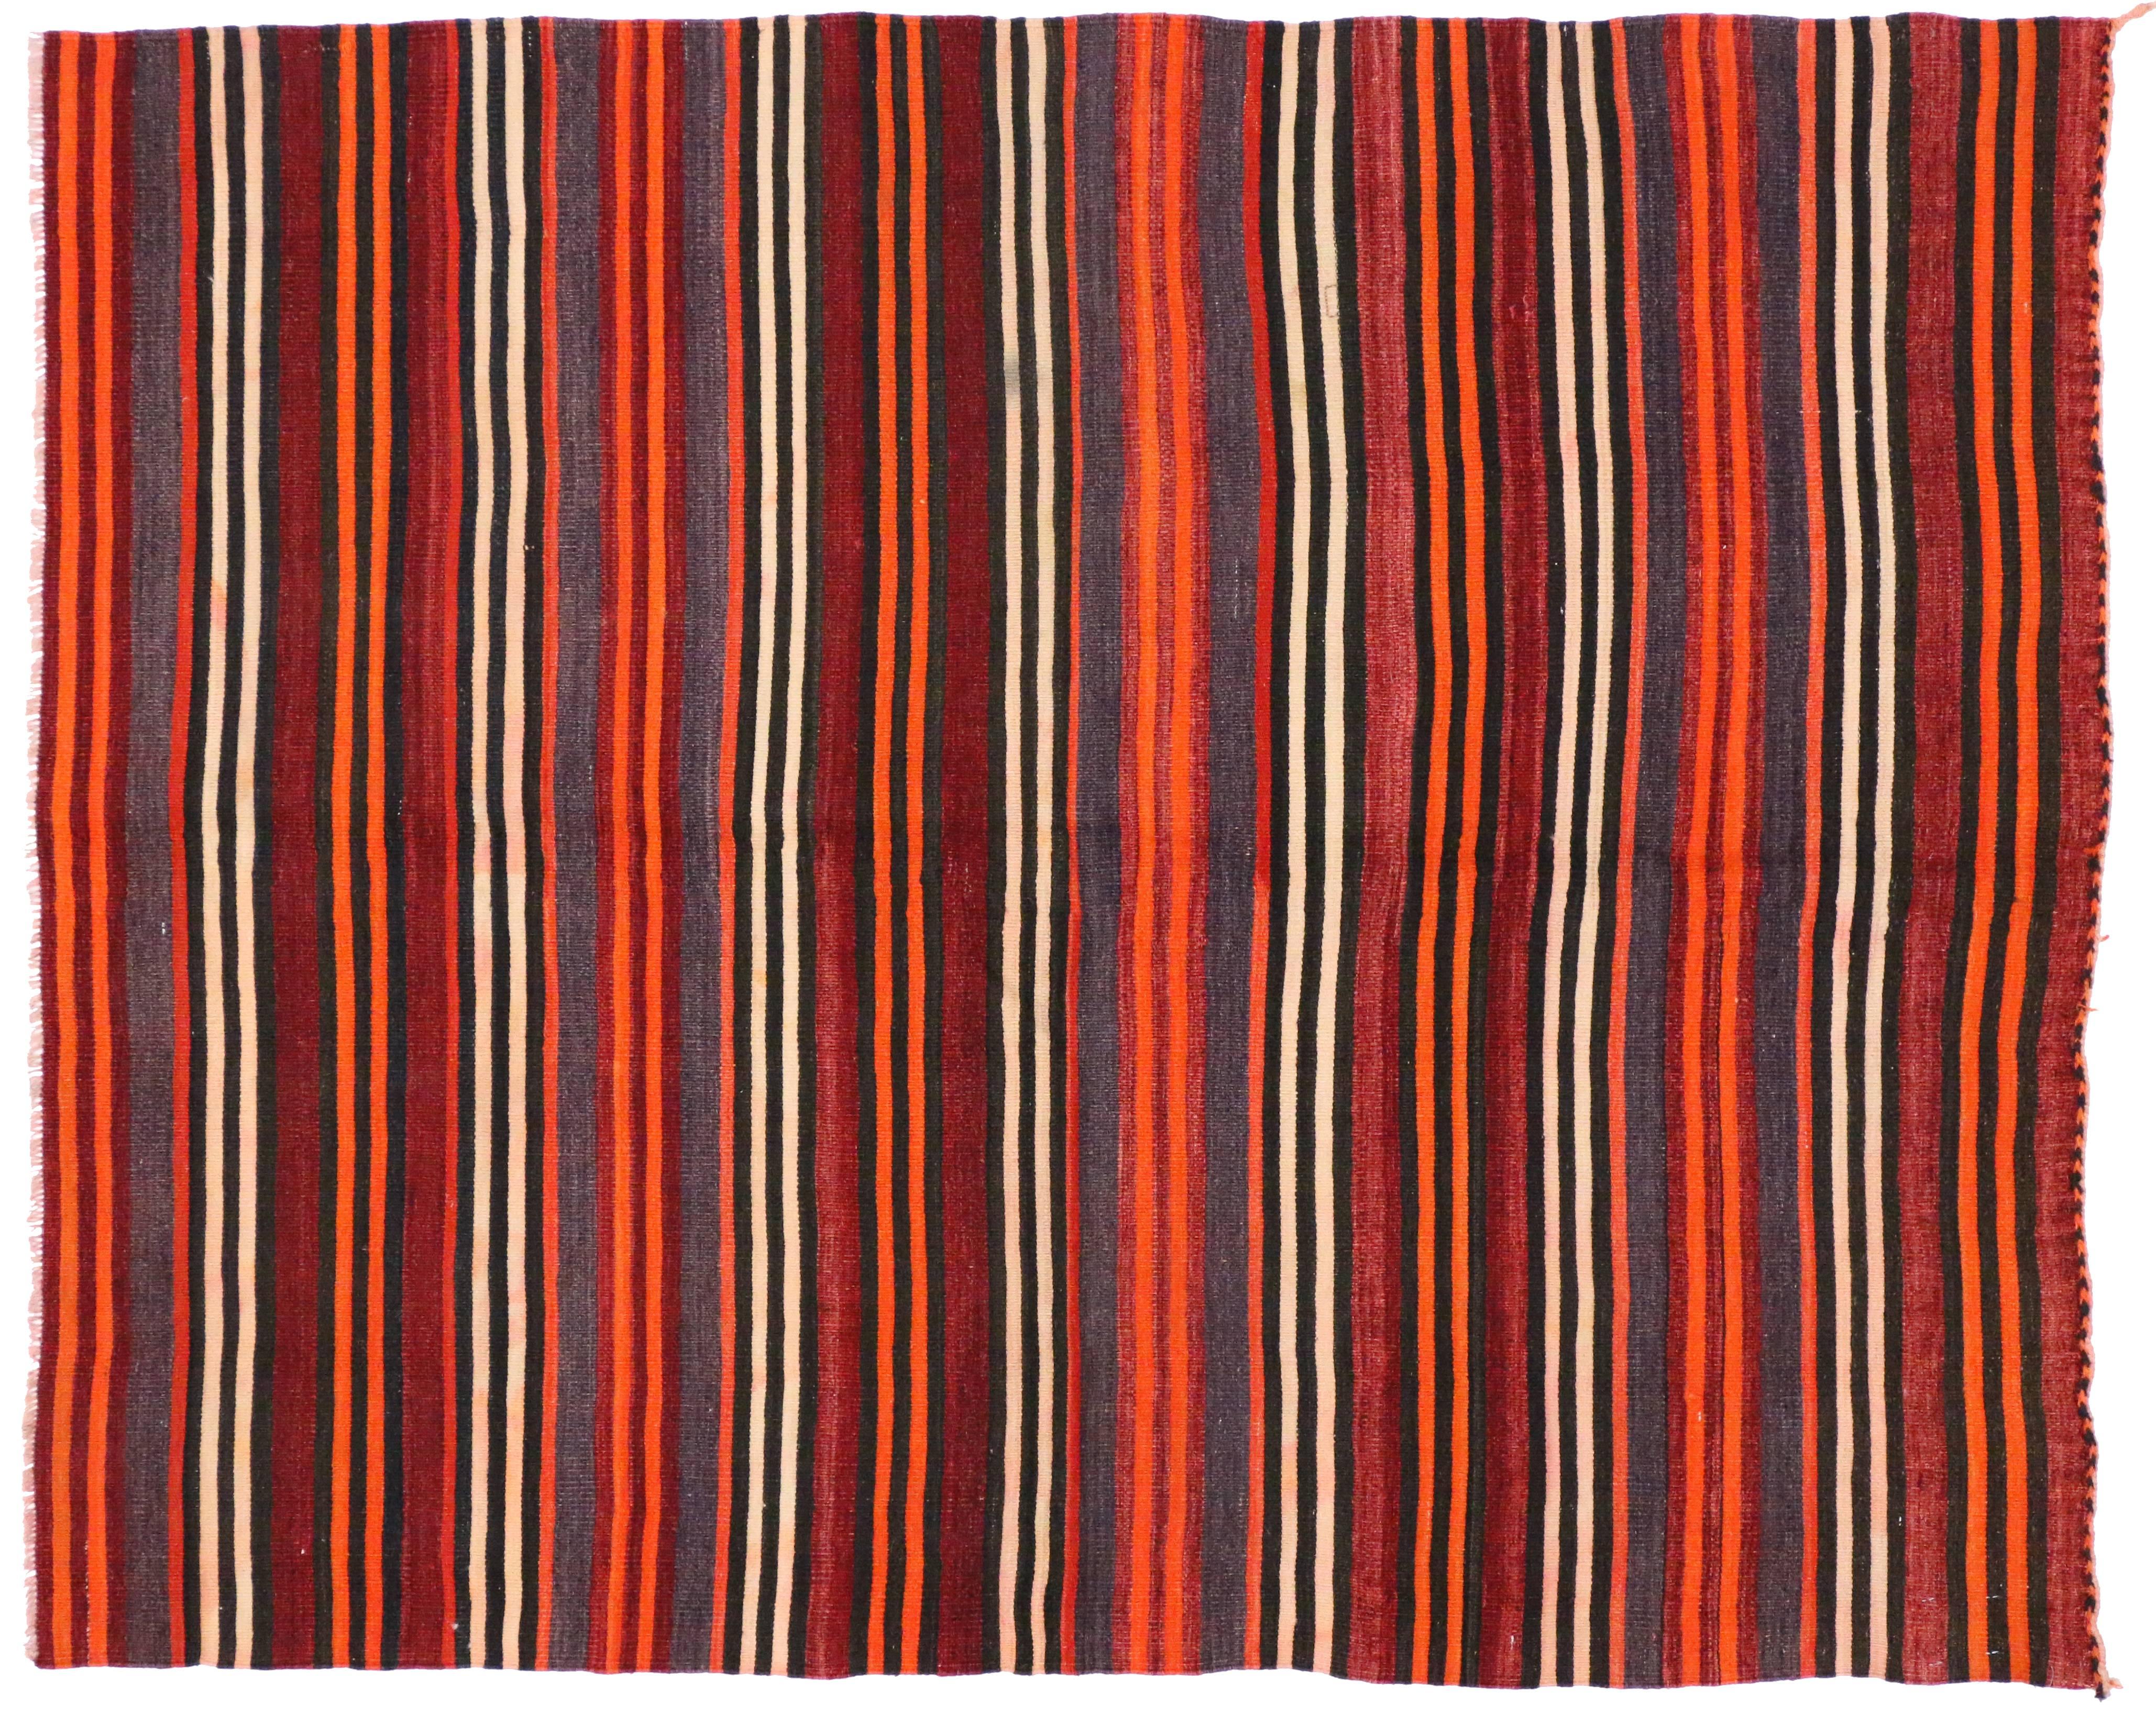 74874, vintage Turkish Kilim rug with stripes. This handwoven wool vintage Turkish kilim rug features alternating stripes in vibrant colors rendered in variegated shades of orange, dark red, black, creamy-beige and violet. The traditional Turkish